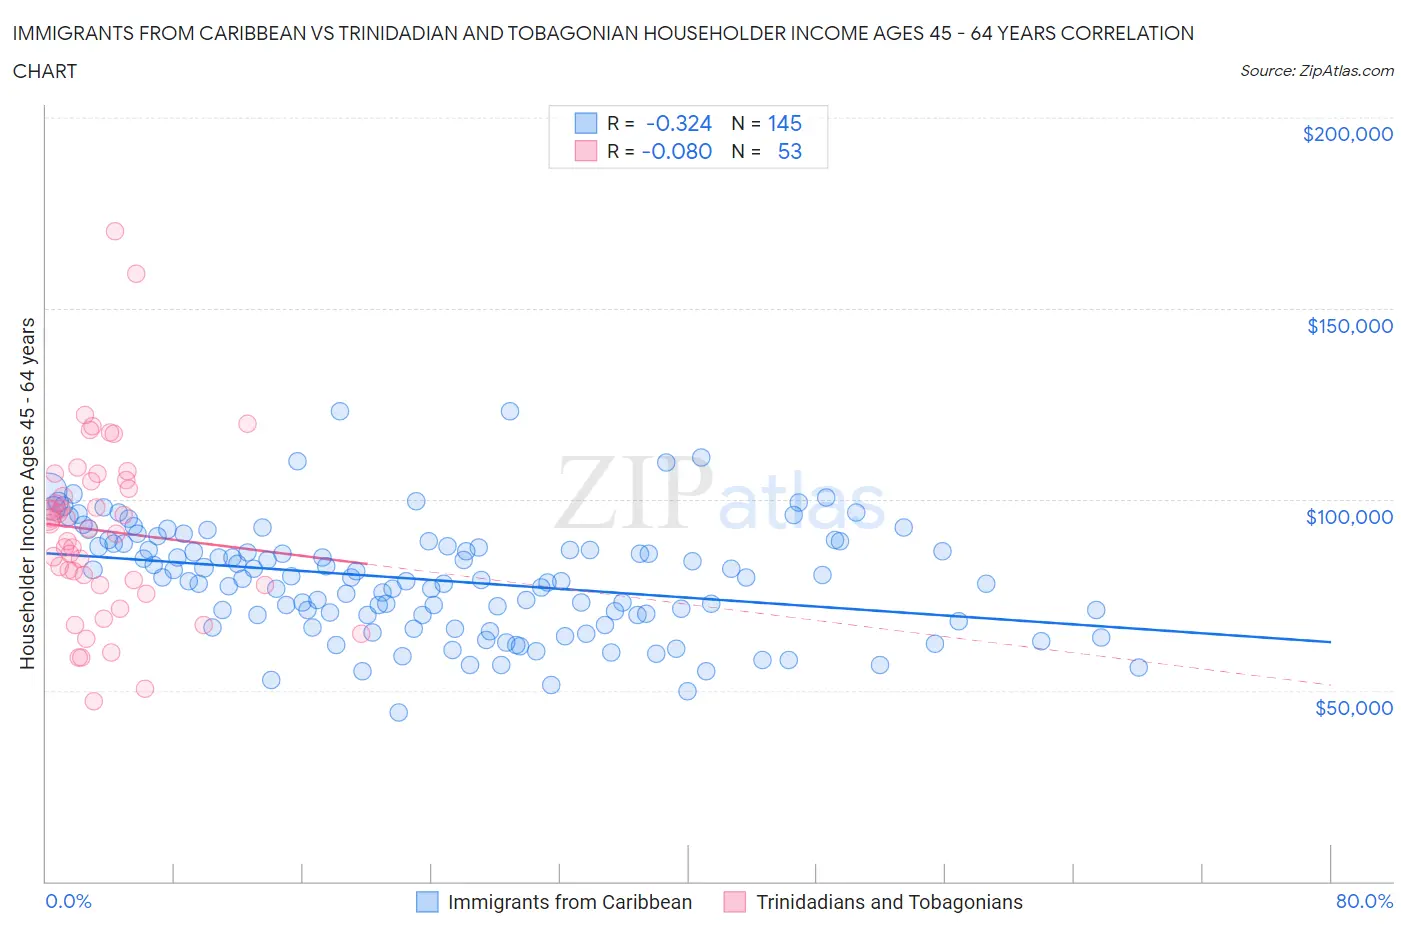 Immigrants from Caribbean vs Trinidadian and Tobagonian Householder Income Ages 45 - 64 years